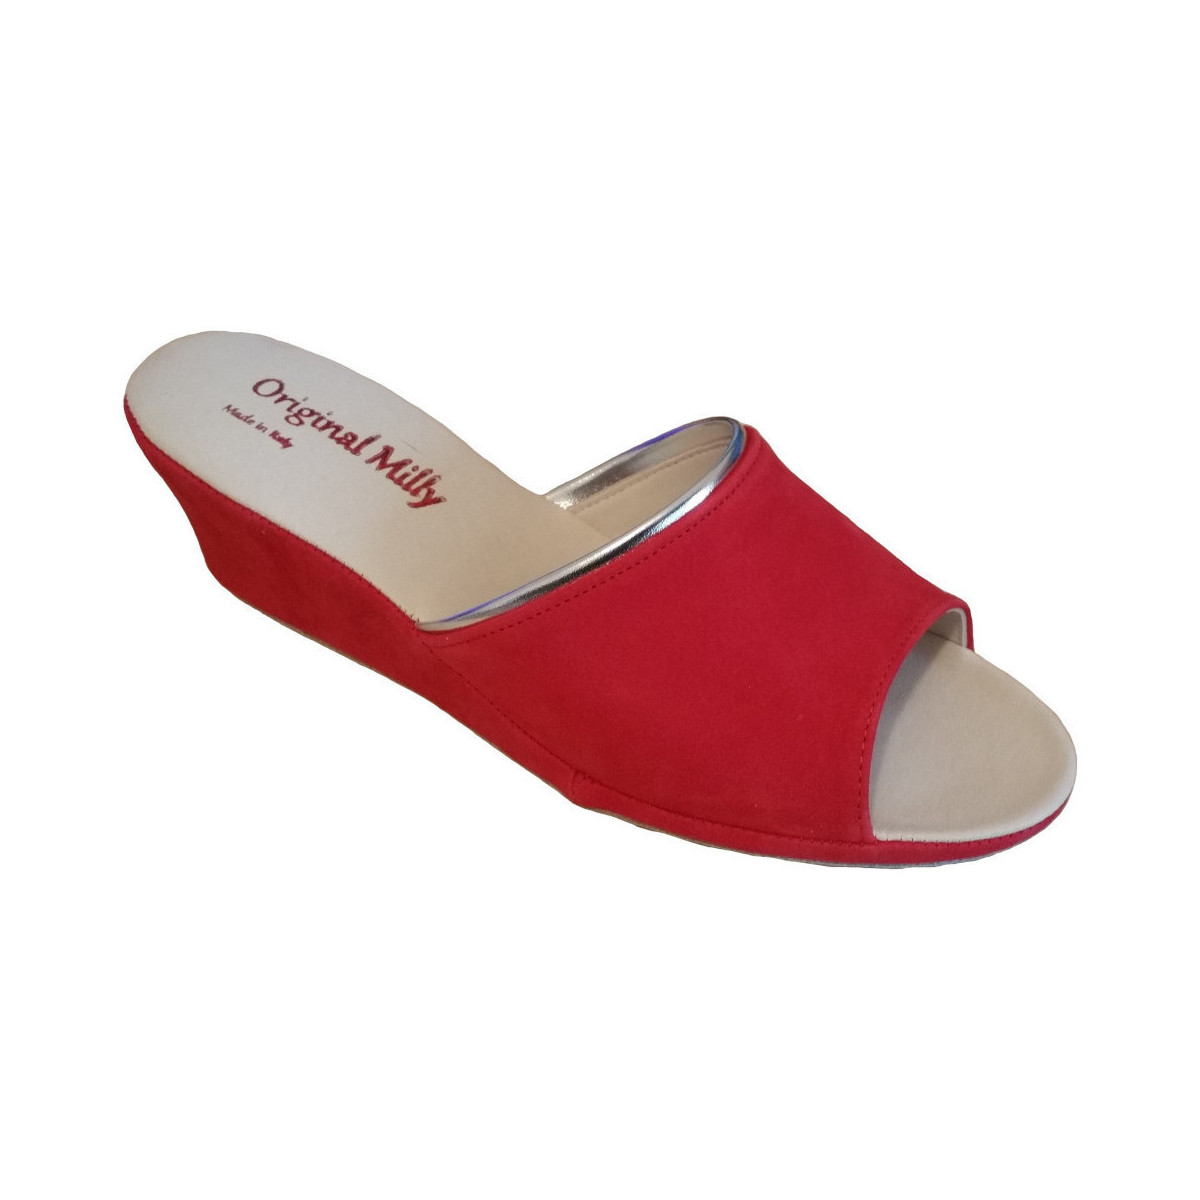 Chaussures Femme Mules Milly MILLY7000ros Rouge